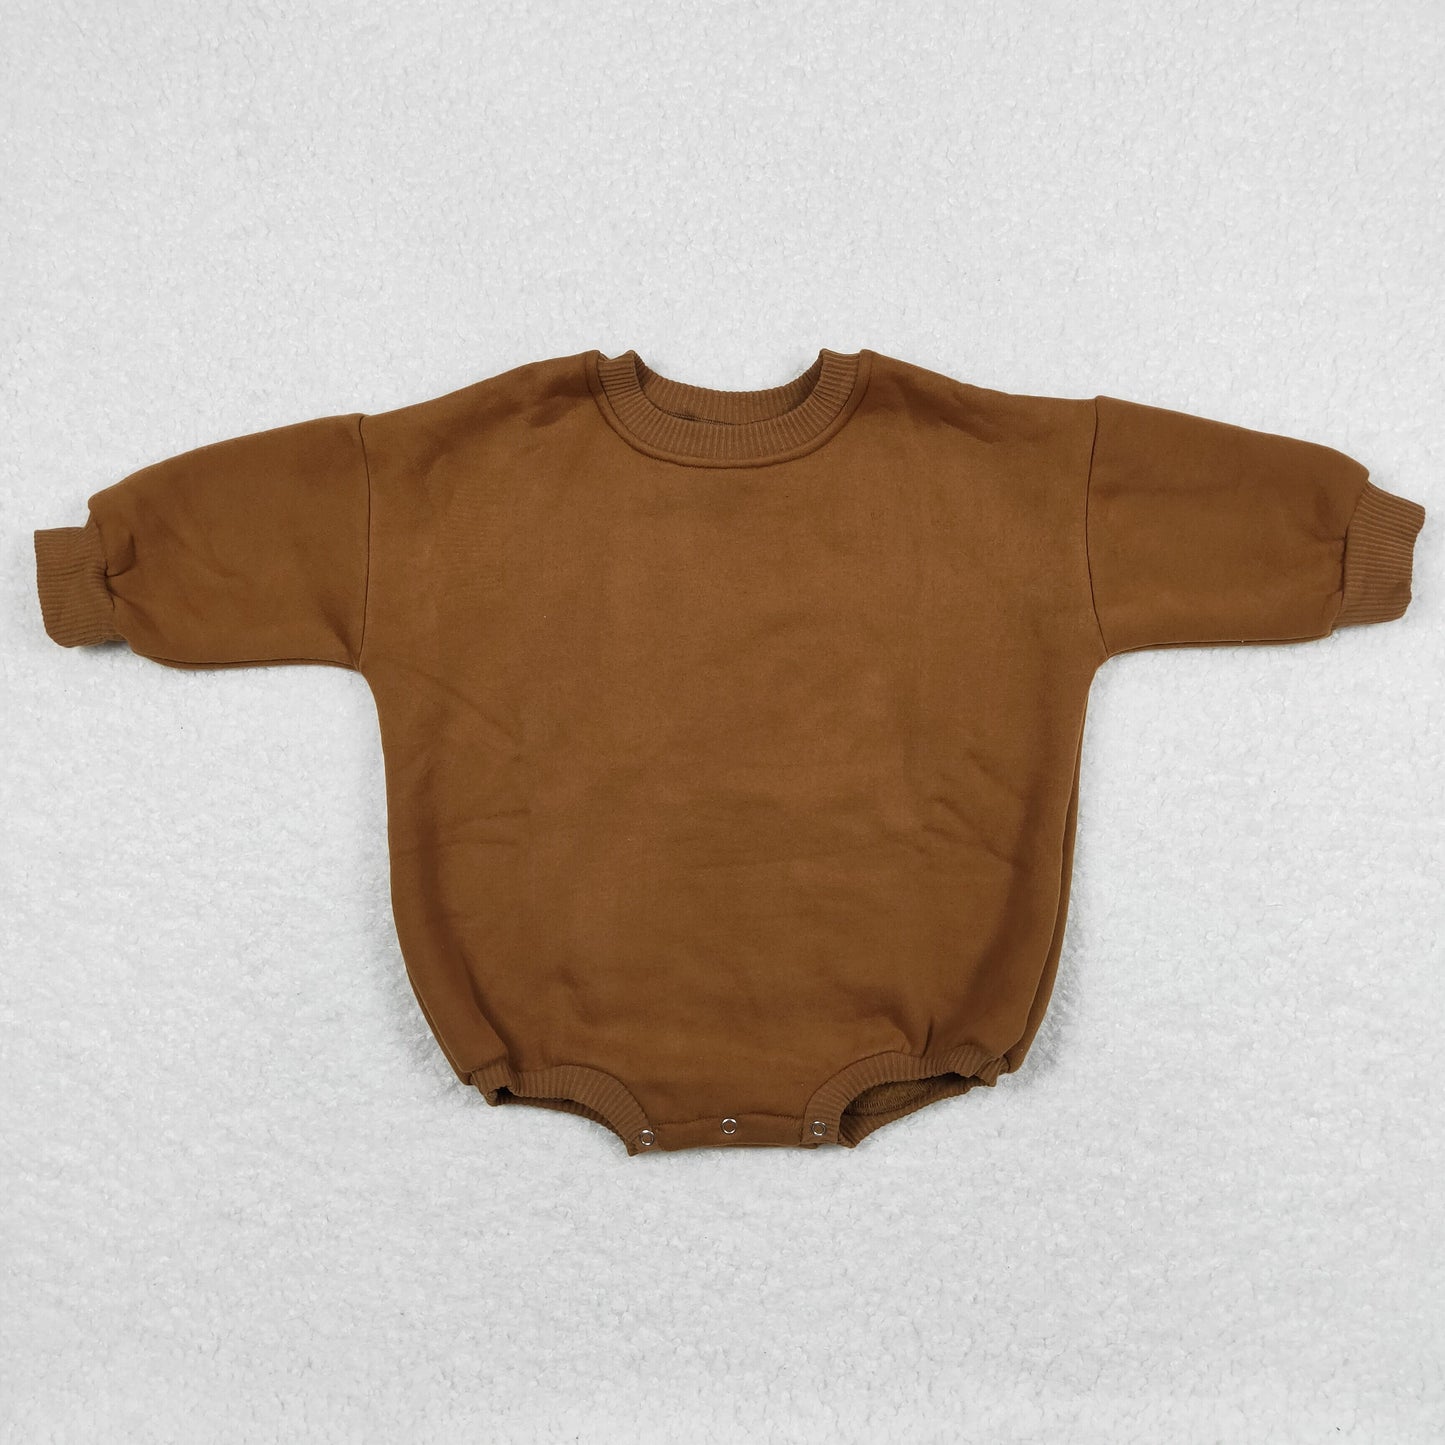 thick long sleeve solid color sweater bodysuit baby clothes